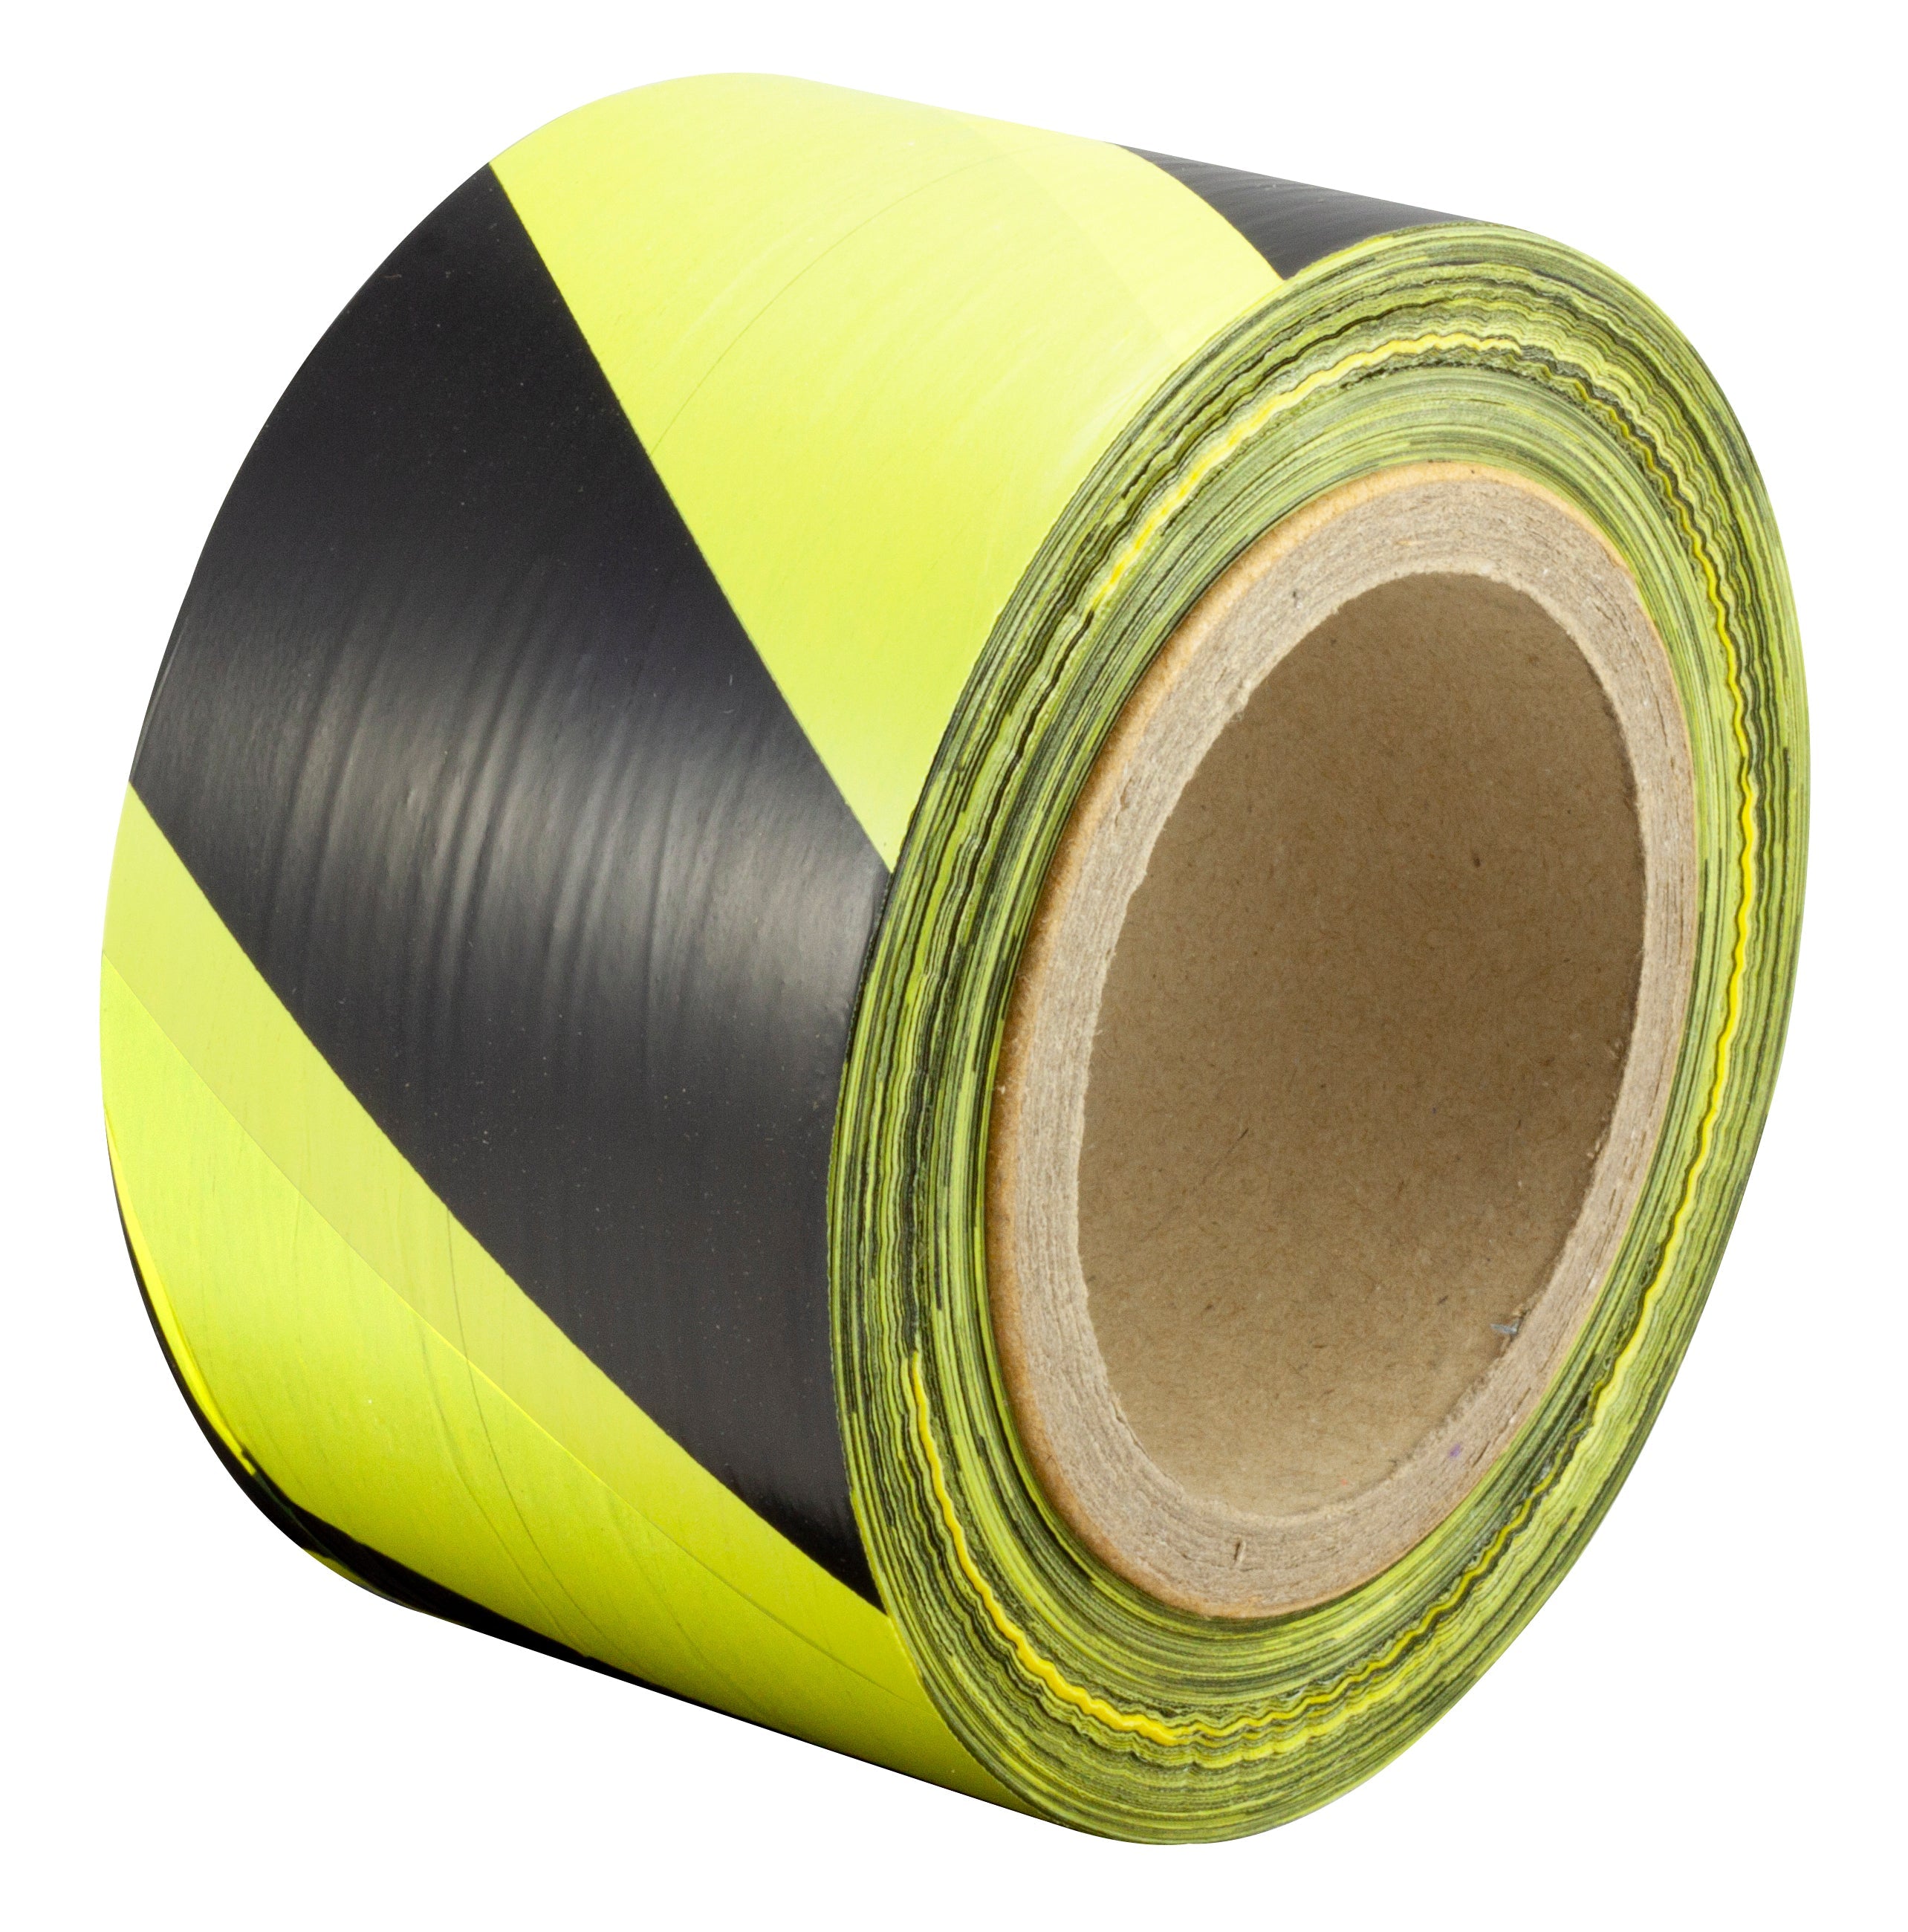 Non-Adhesive Barrier Tape (BLACK/YELLOW) 75mm x 500m x 20 Micron - Per Pack